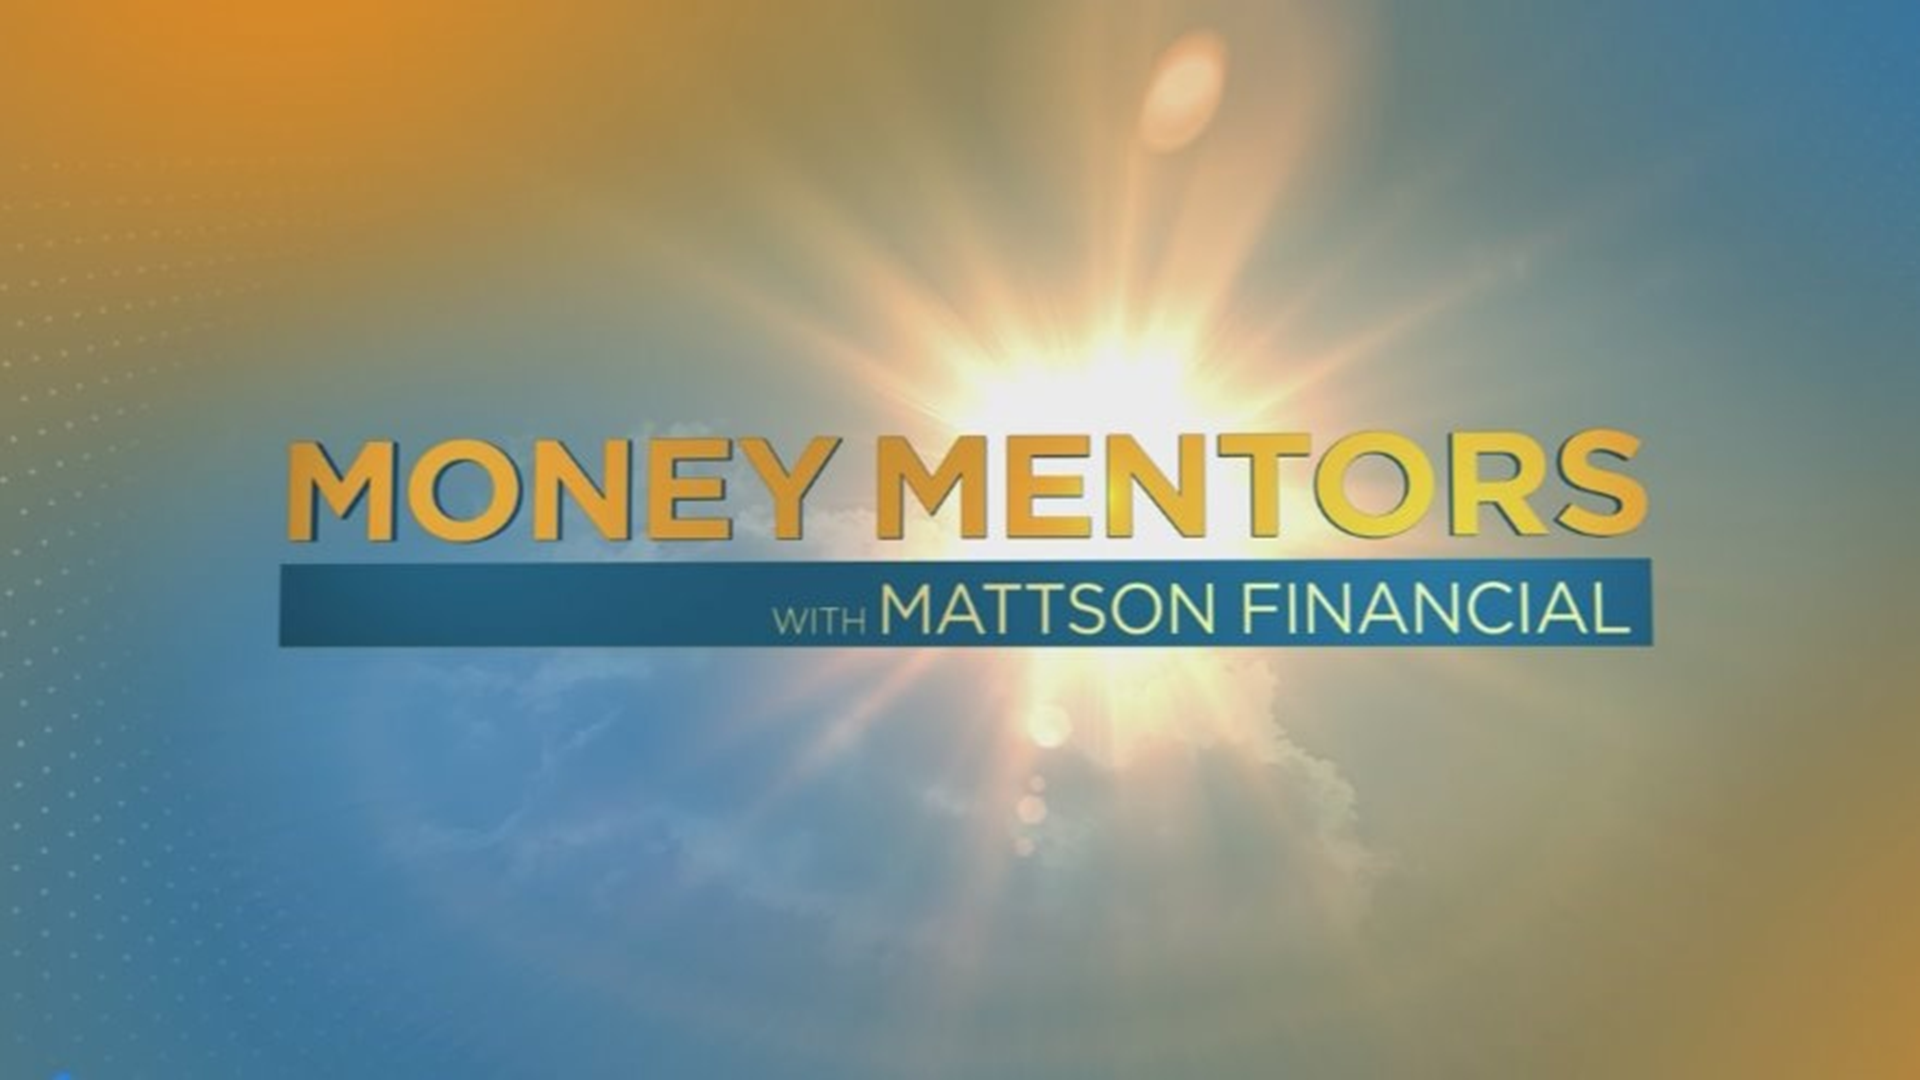 Running out of money during retirement -- that can be a pretty scary thought. Our Money Mentors had advice for creating your own paycheck in retirement.